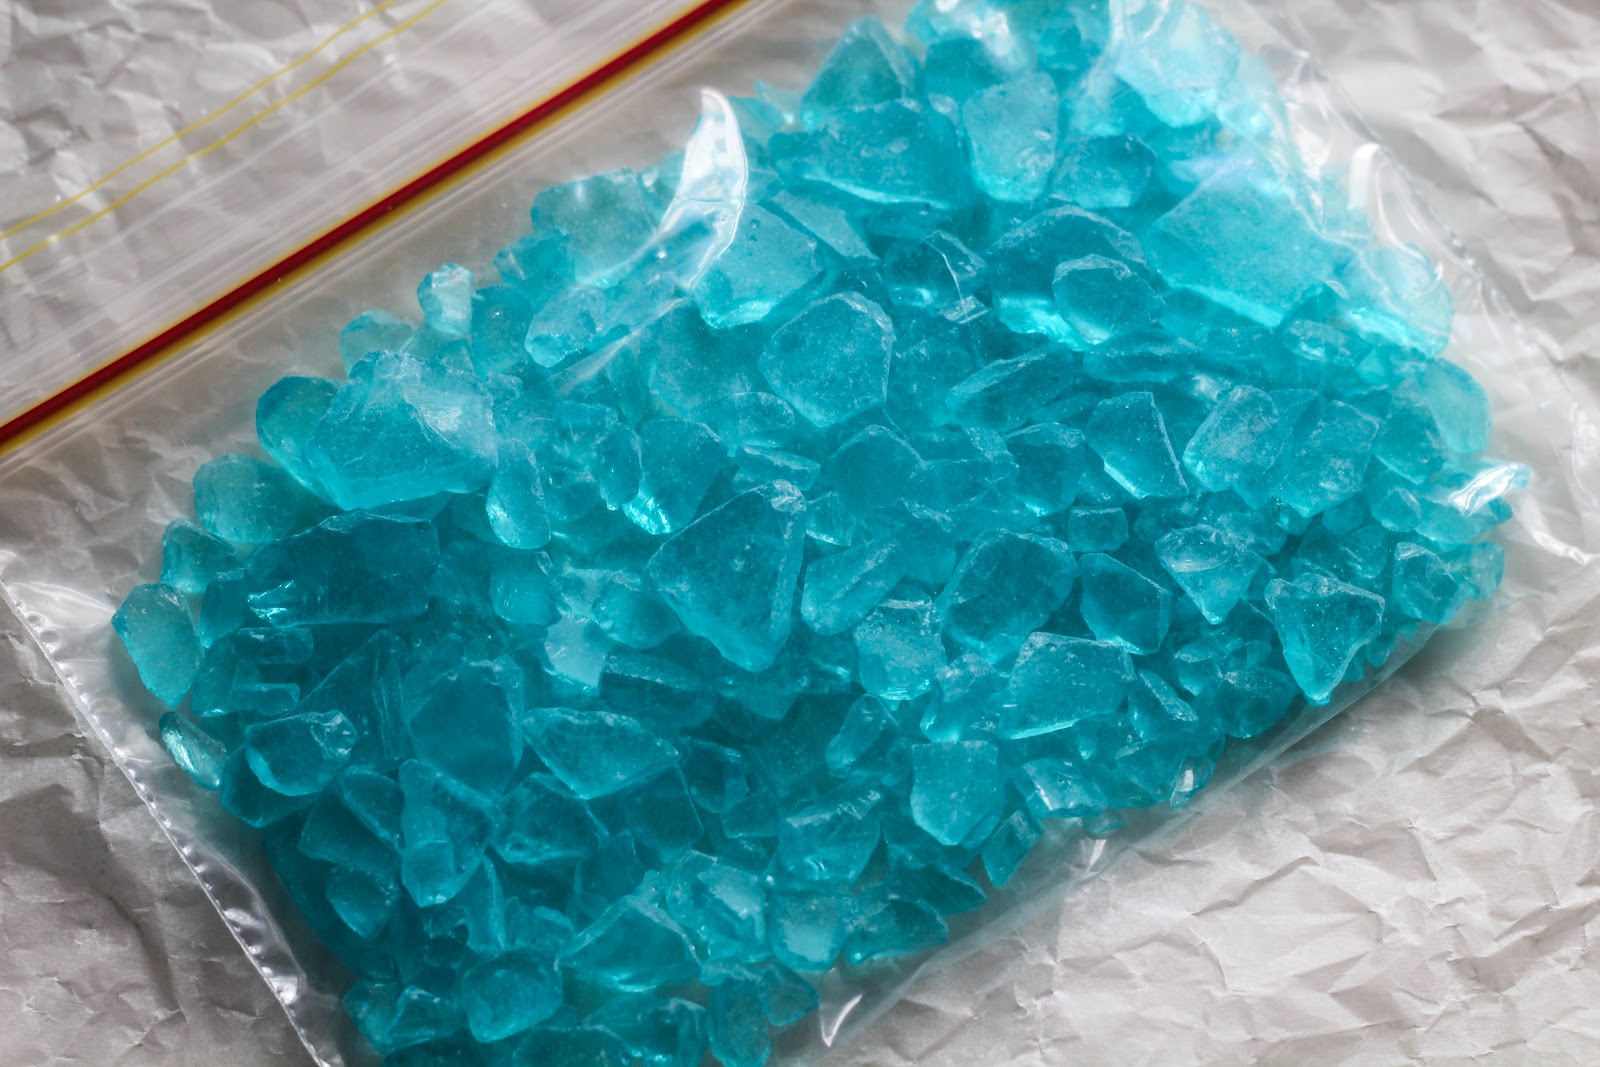 Blue Meth. In the United States Albuquerque police seized drug dealers in a real blue methamphetamine, both in Breaking Bad movie.